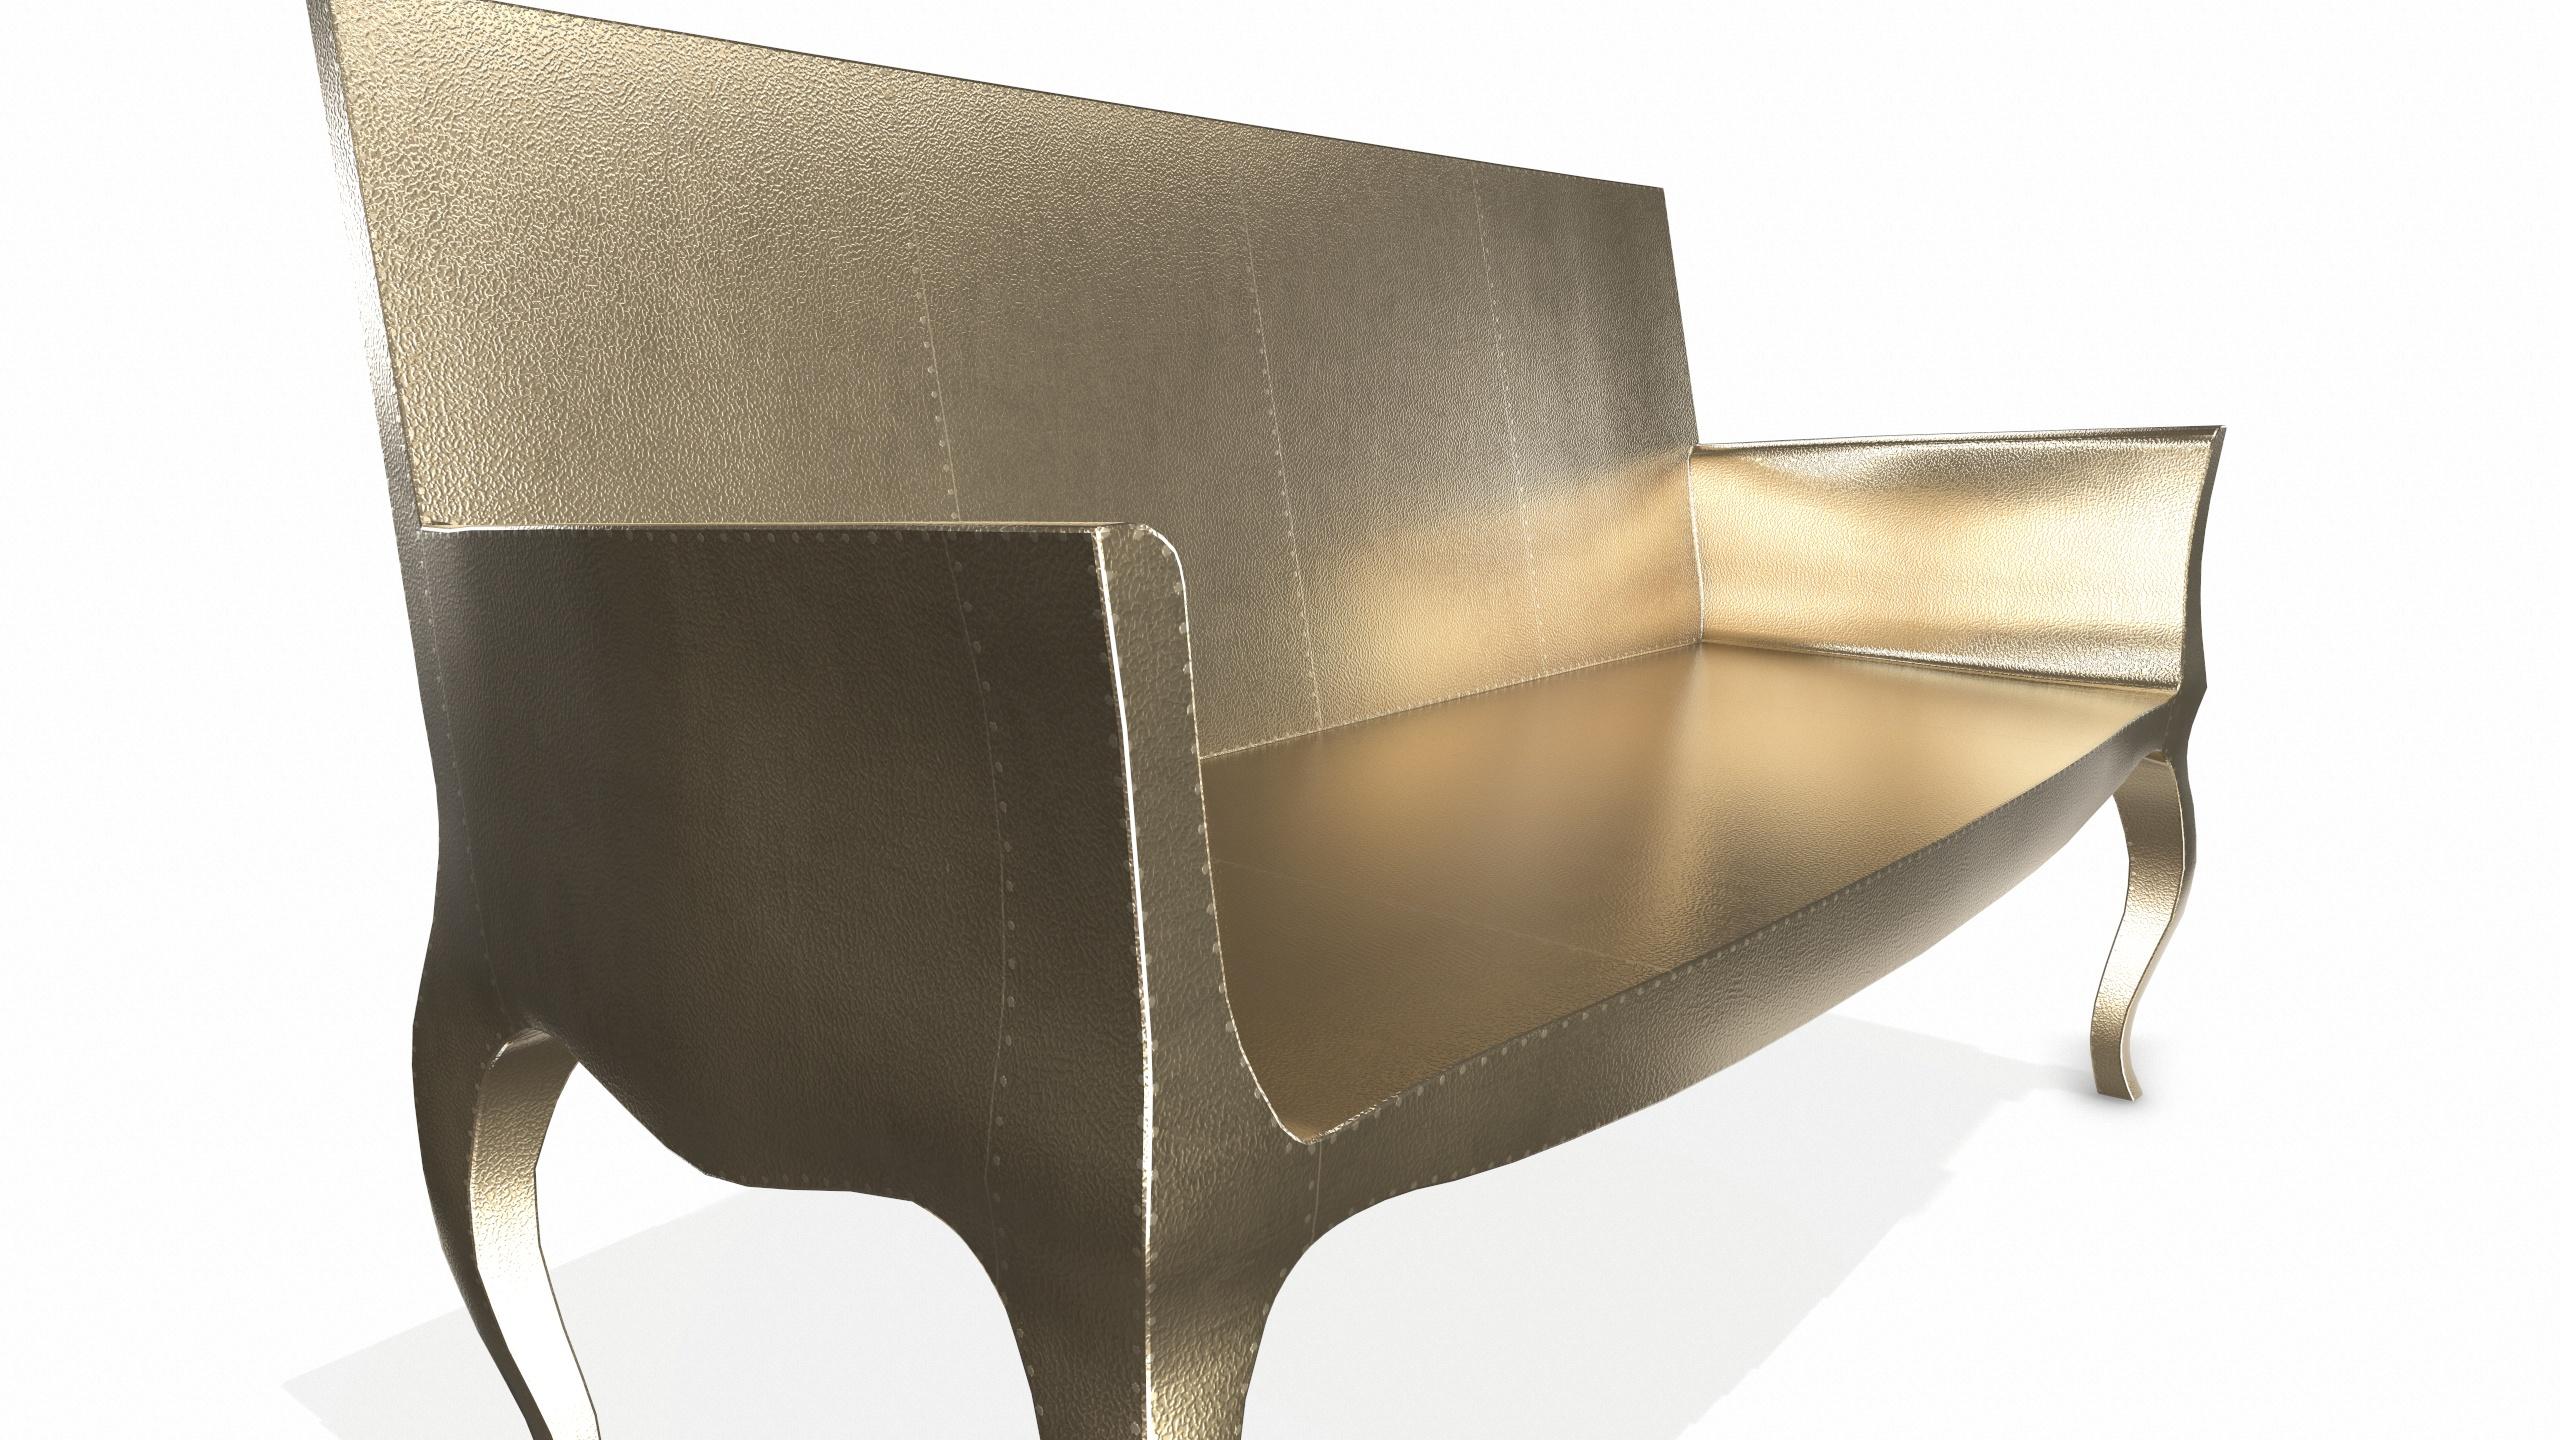 American Louise Settee Art Deco Chaise Longues in Fine Hammered Brass by Paul Mathieu For Sale